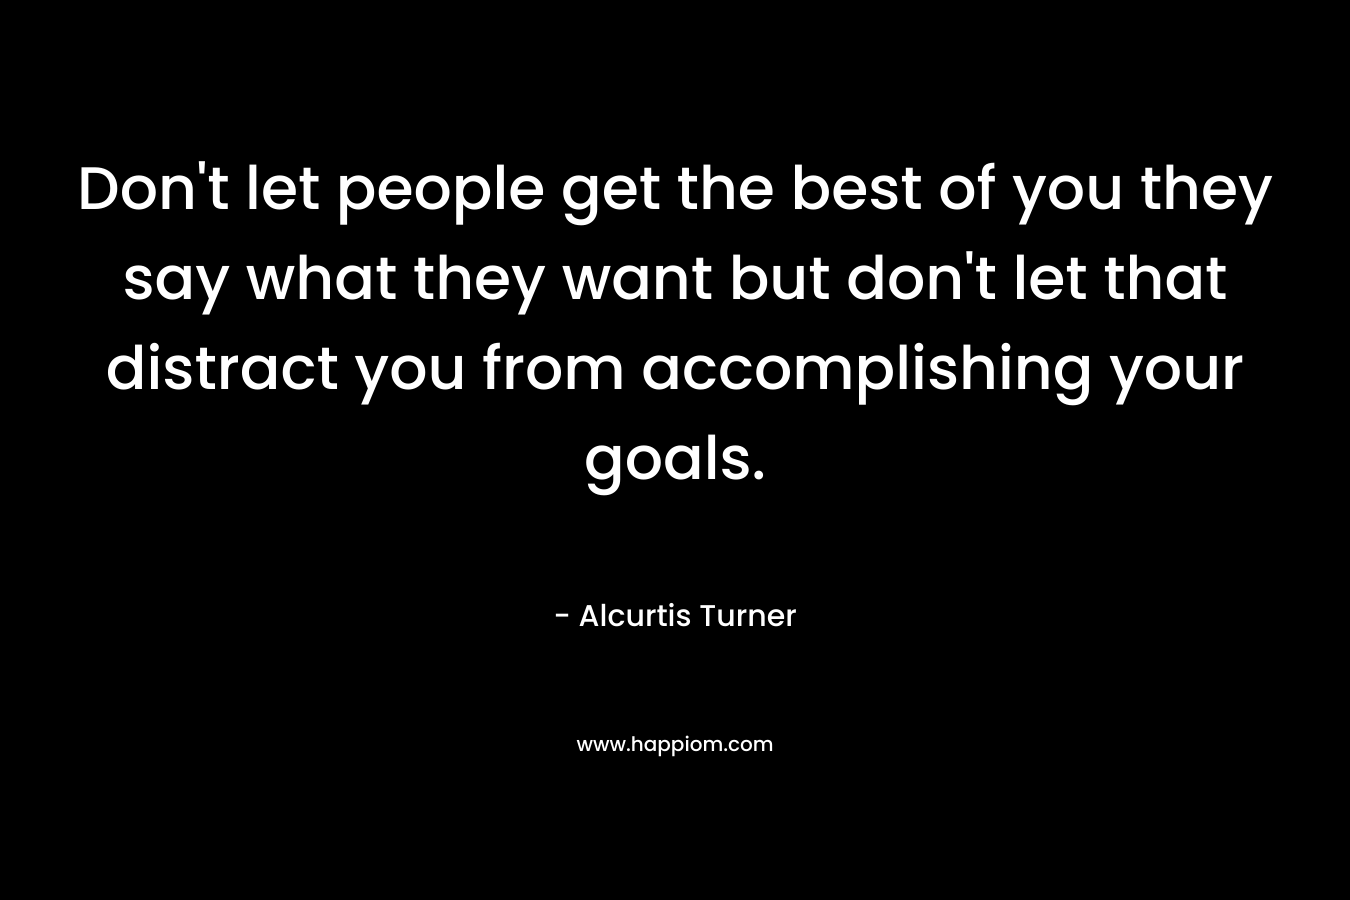 Don’t let people get the best of you they say what they want but don’t let that distract you from accomplishing your goals. – Alcurtis Turner